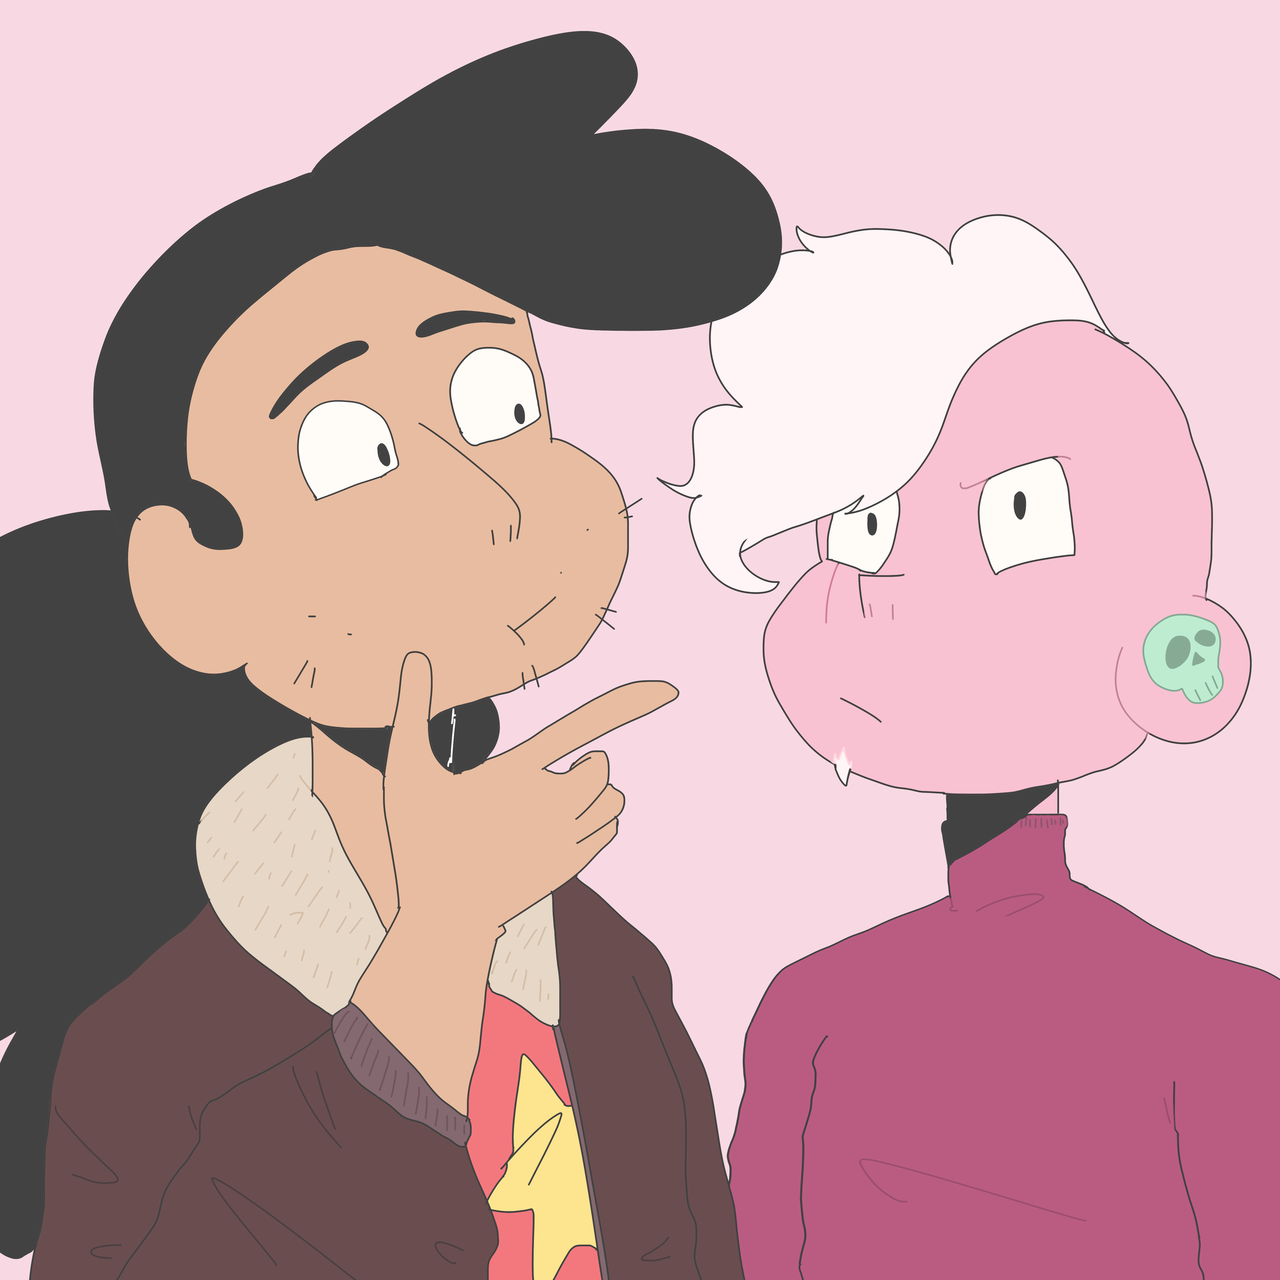 my biggest headcanon for lars is he growing a beard and stevonnie making fun of it (lars will laugh along with them, o’ course)